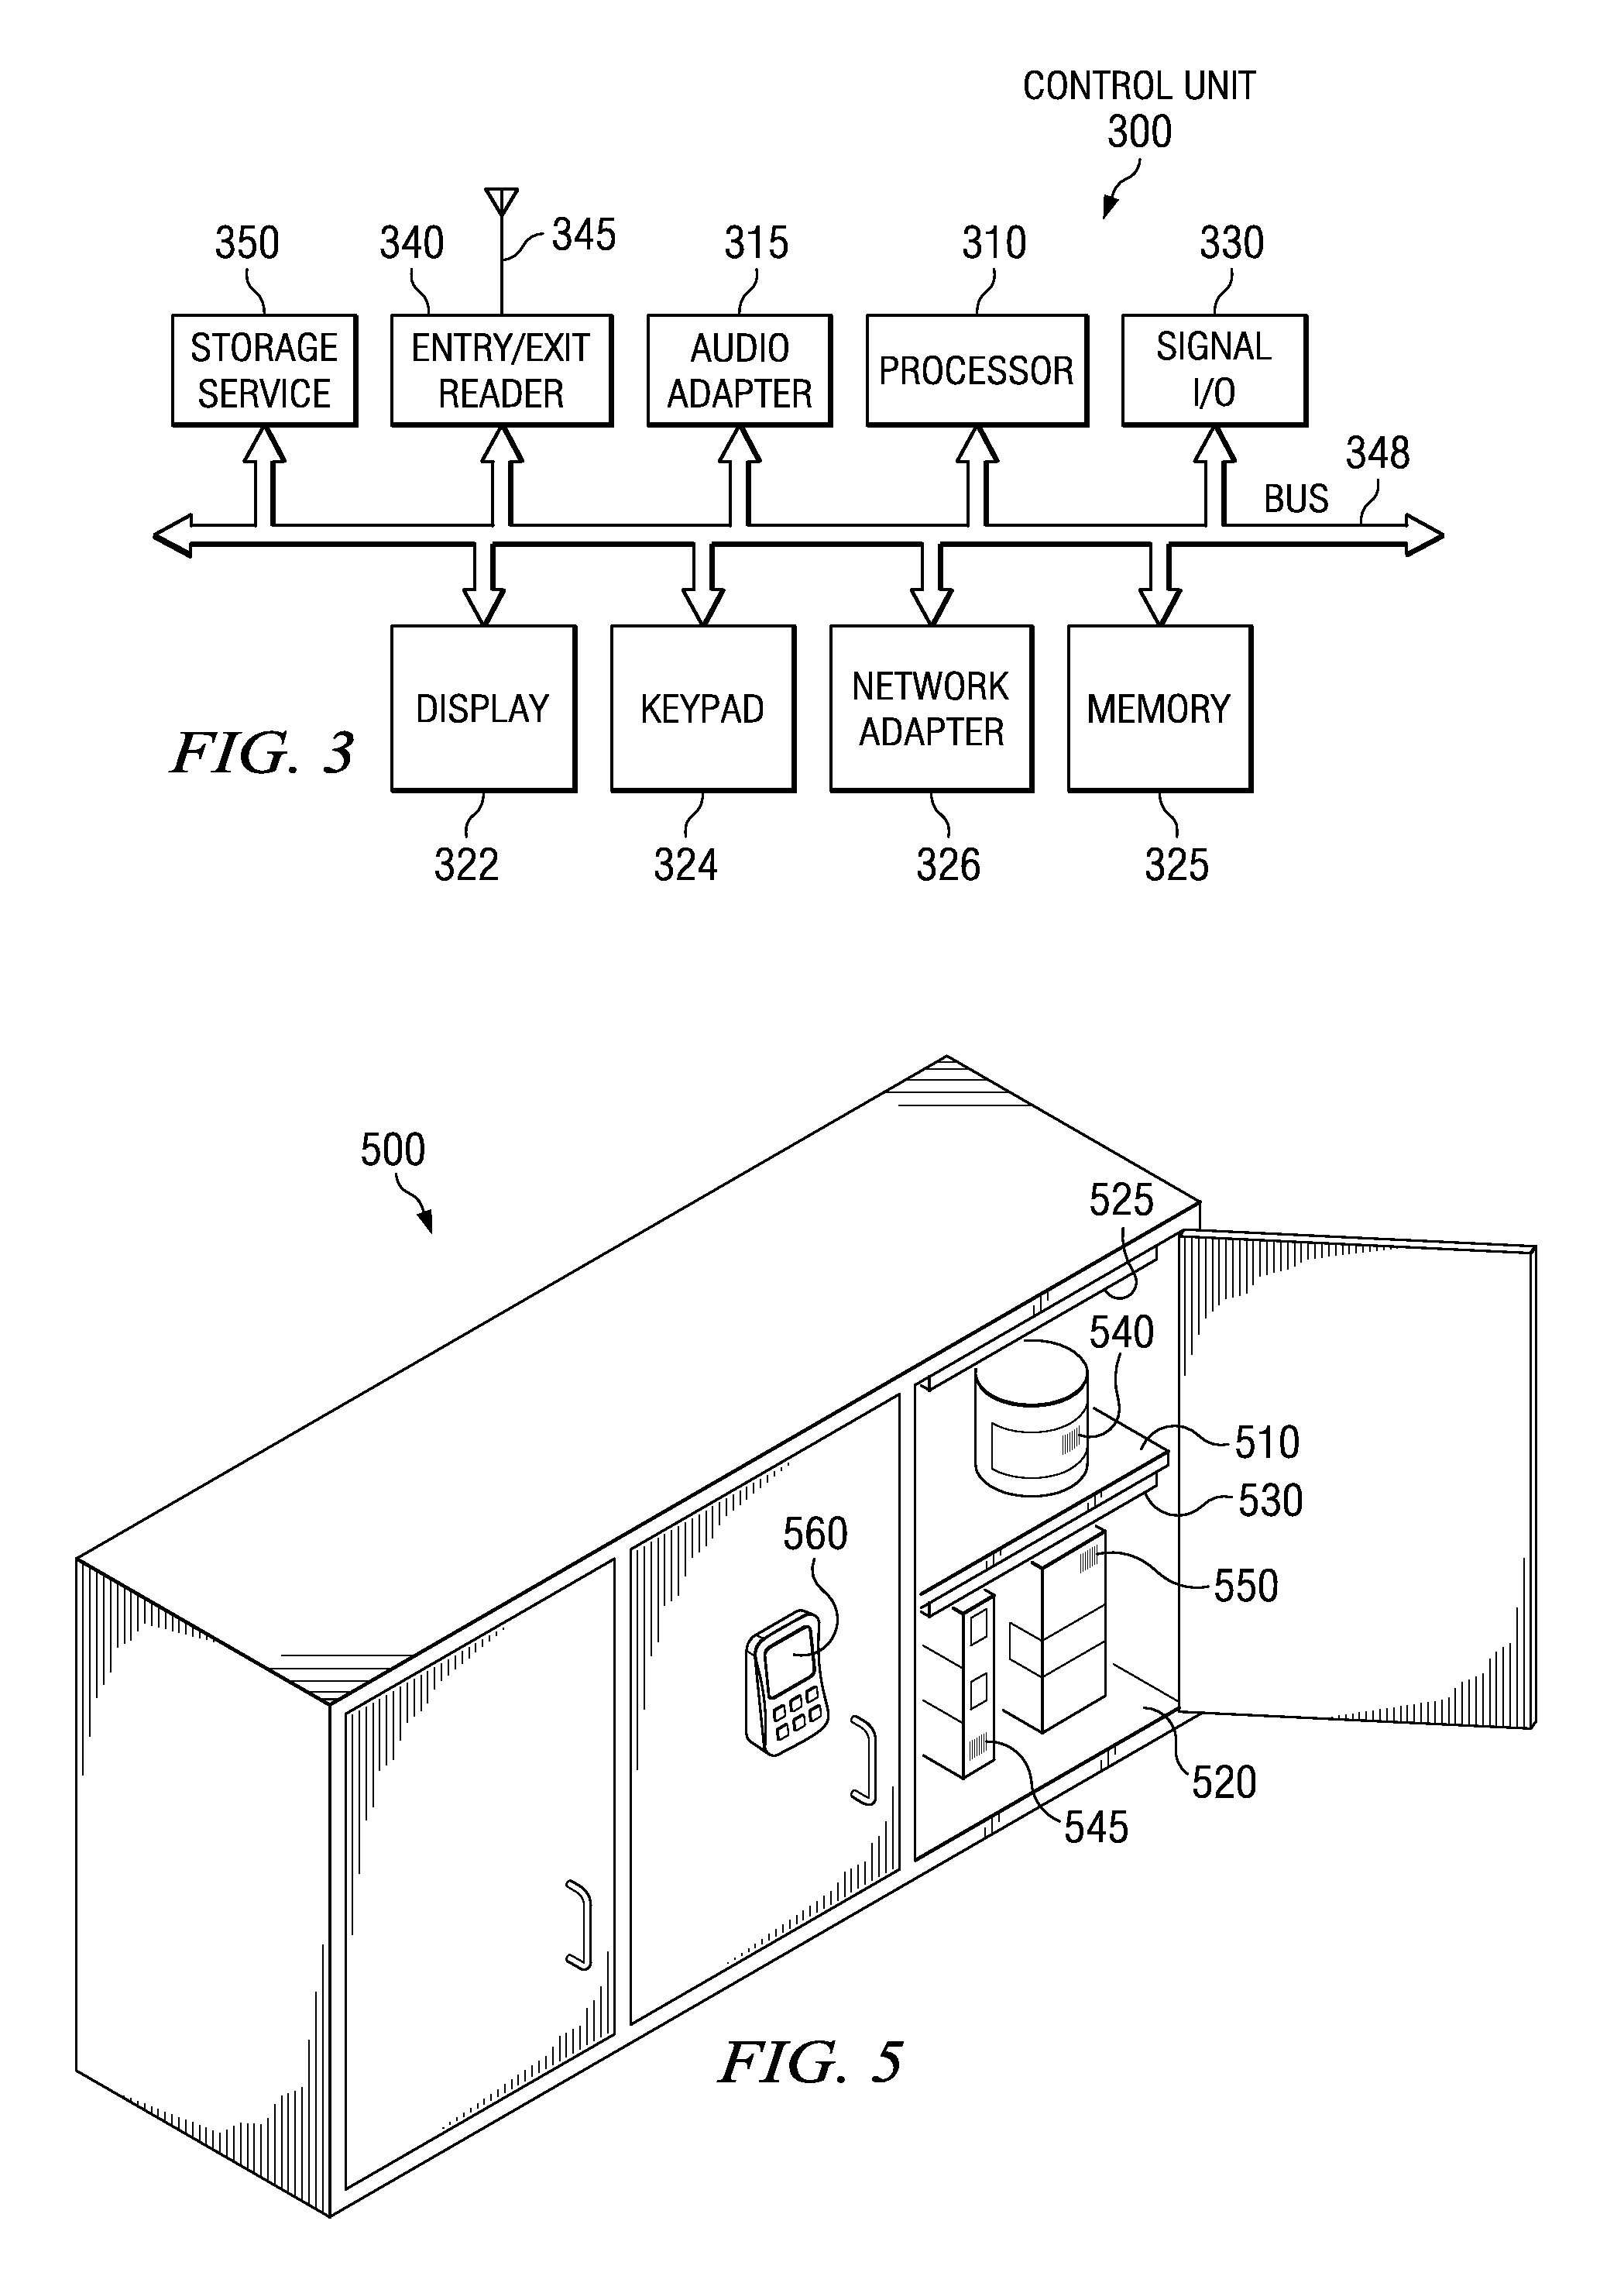 Method and apparatus for generating policy driven meal plans